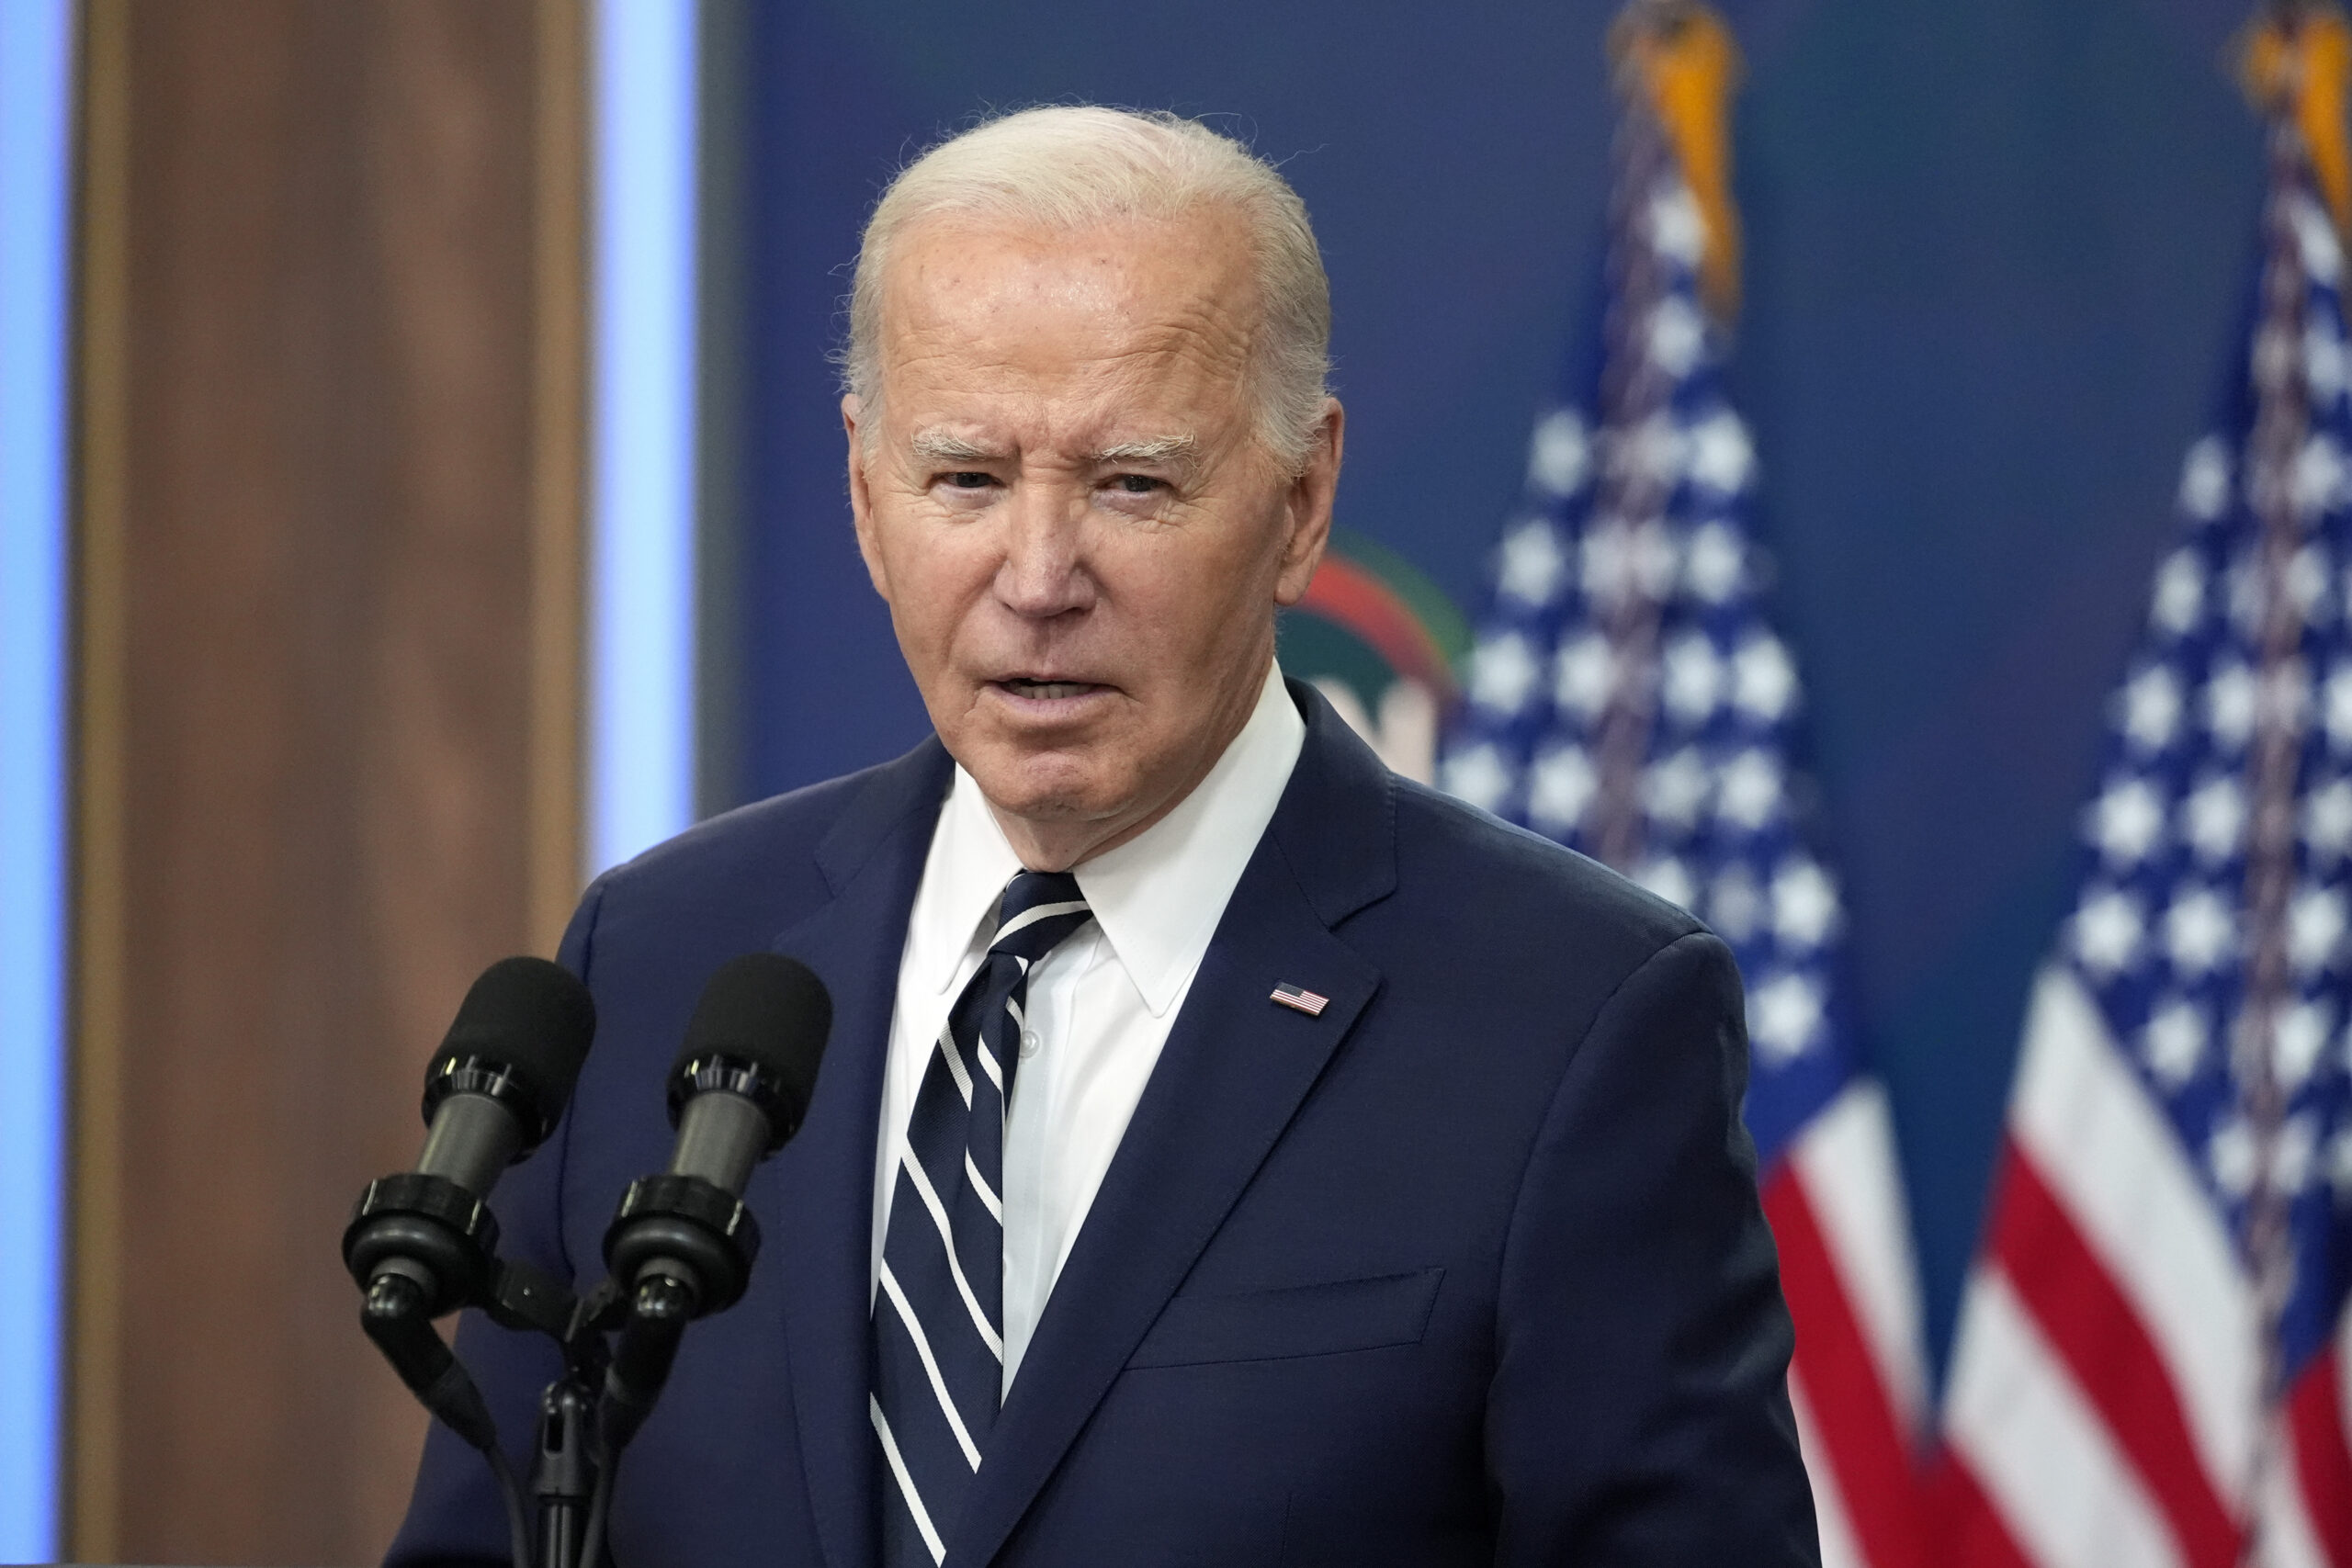 biden-criticizes-trump-and-says-“something-broke”-after-he-lost-the-2020-election